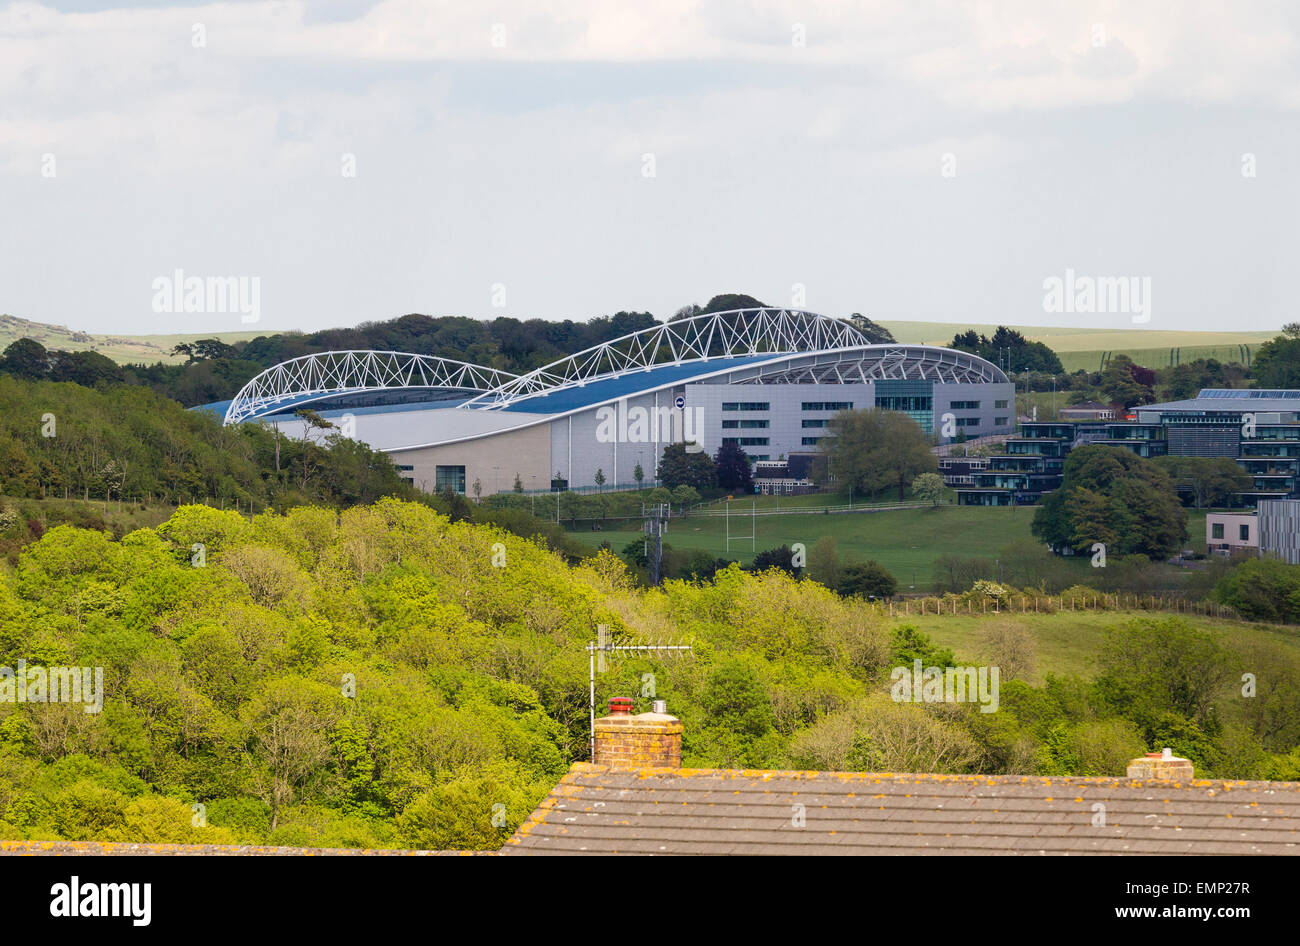 The Amex Stadium is Brighton and Hove Albion Football Club's ground. Stock Photo